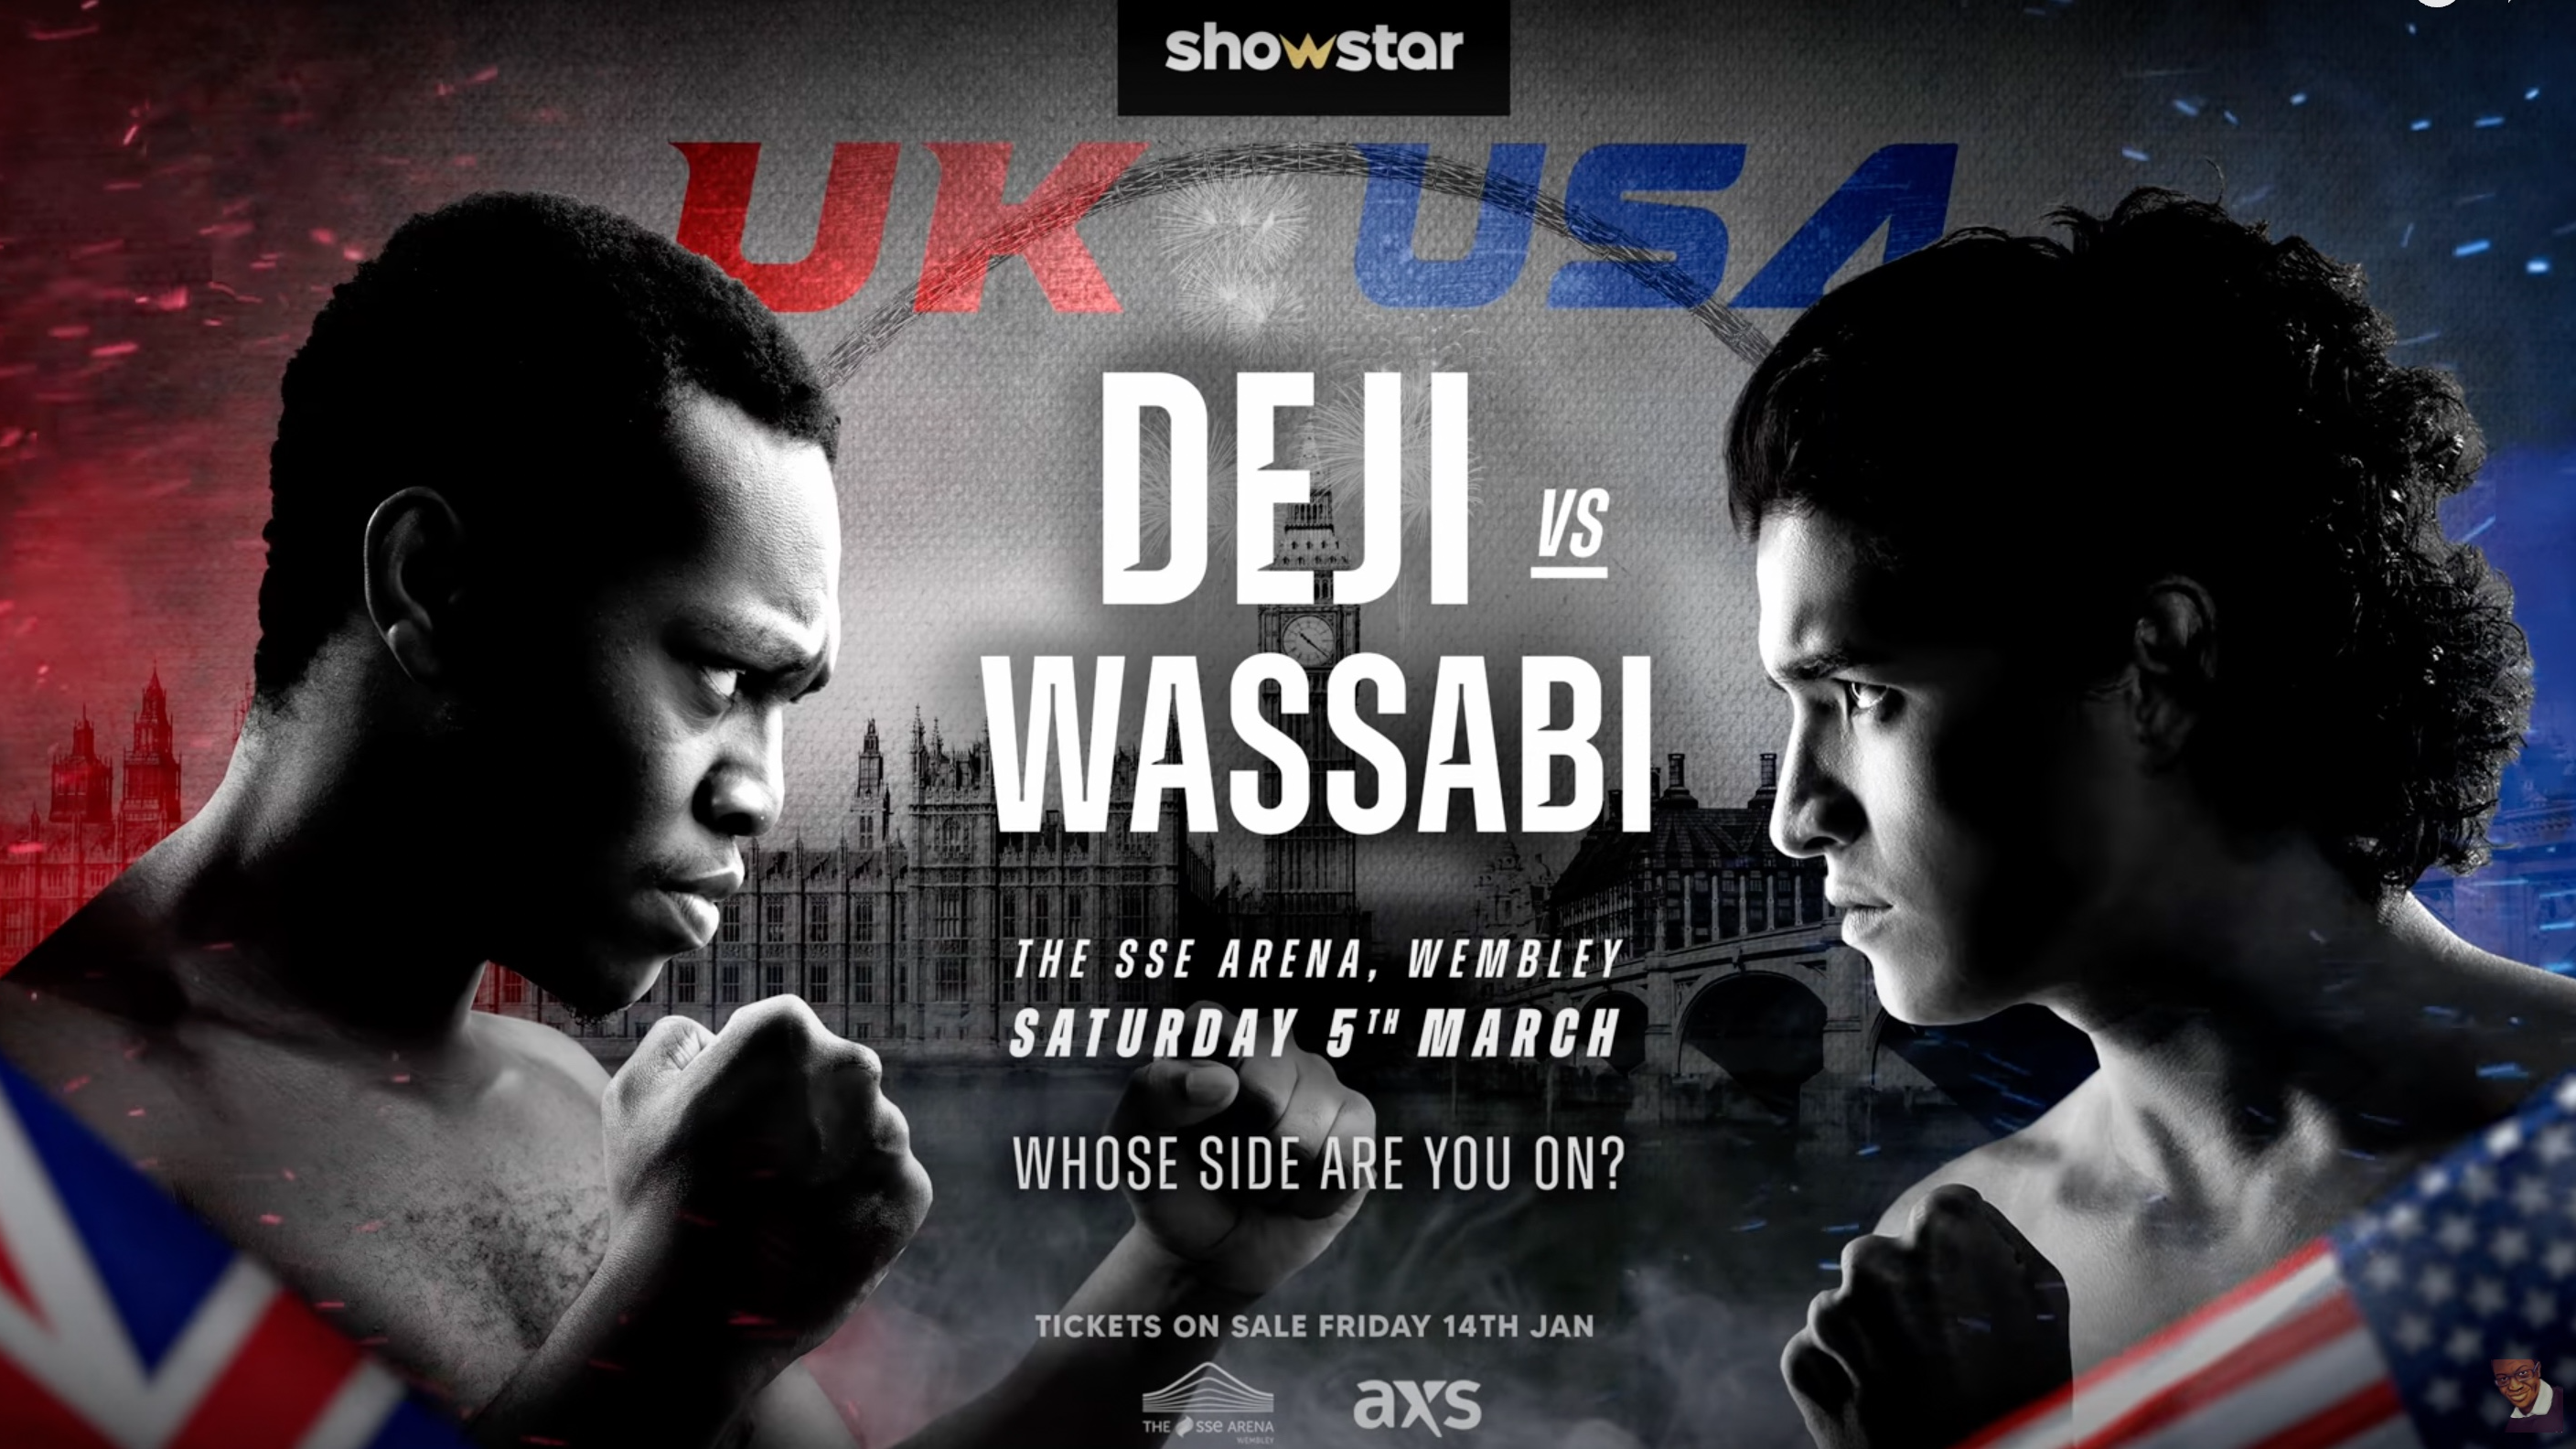 Arrange Compose Rarity Deji To Face Alex Wassabi In Biggest YouTube Boxing Fight Of 2022